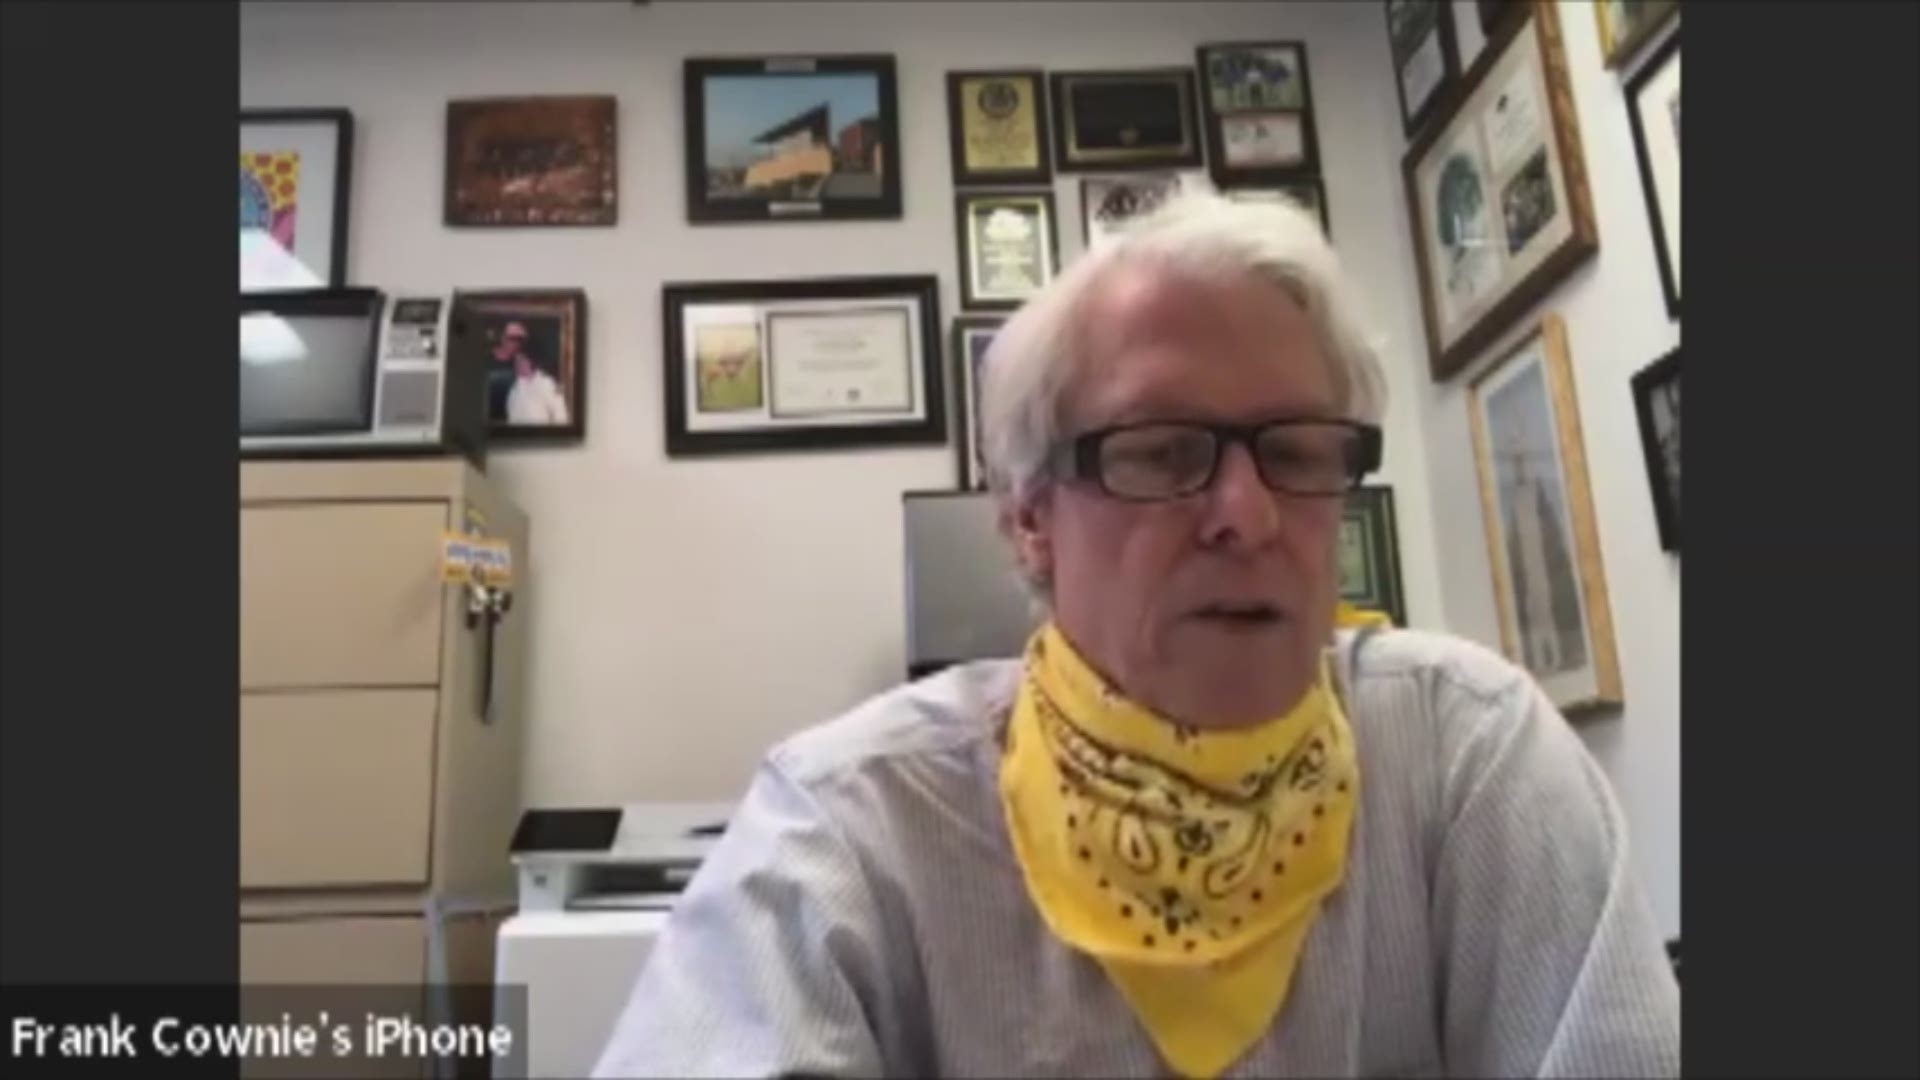 Local 5 spoke with Des Moines Mayor Frank Cownie on his amendment to the emergency proclamation, which includes encouraging wearing of facial coverings.